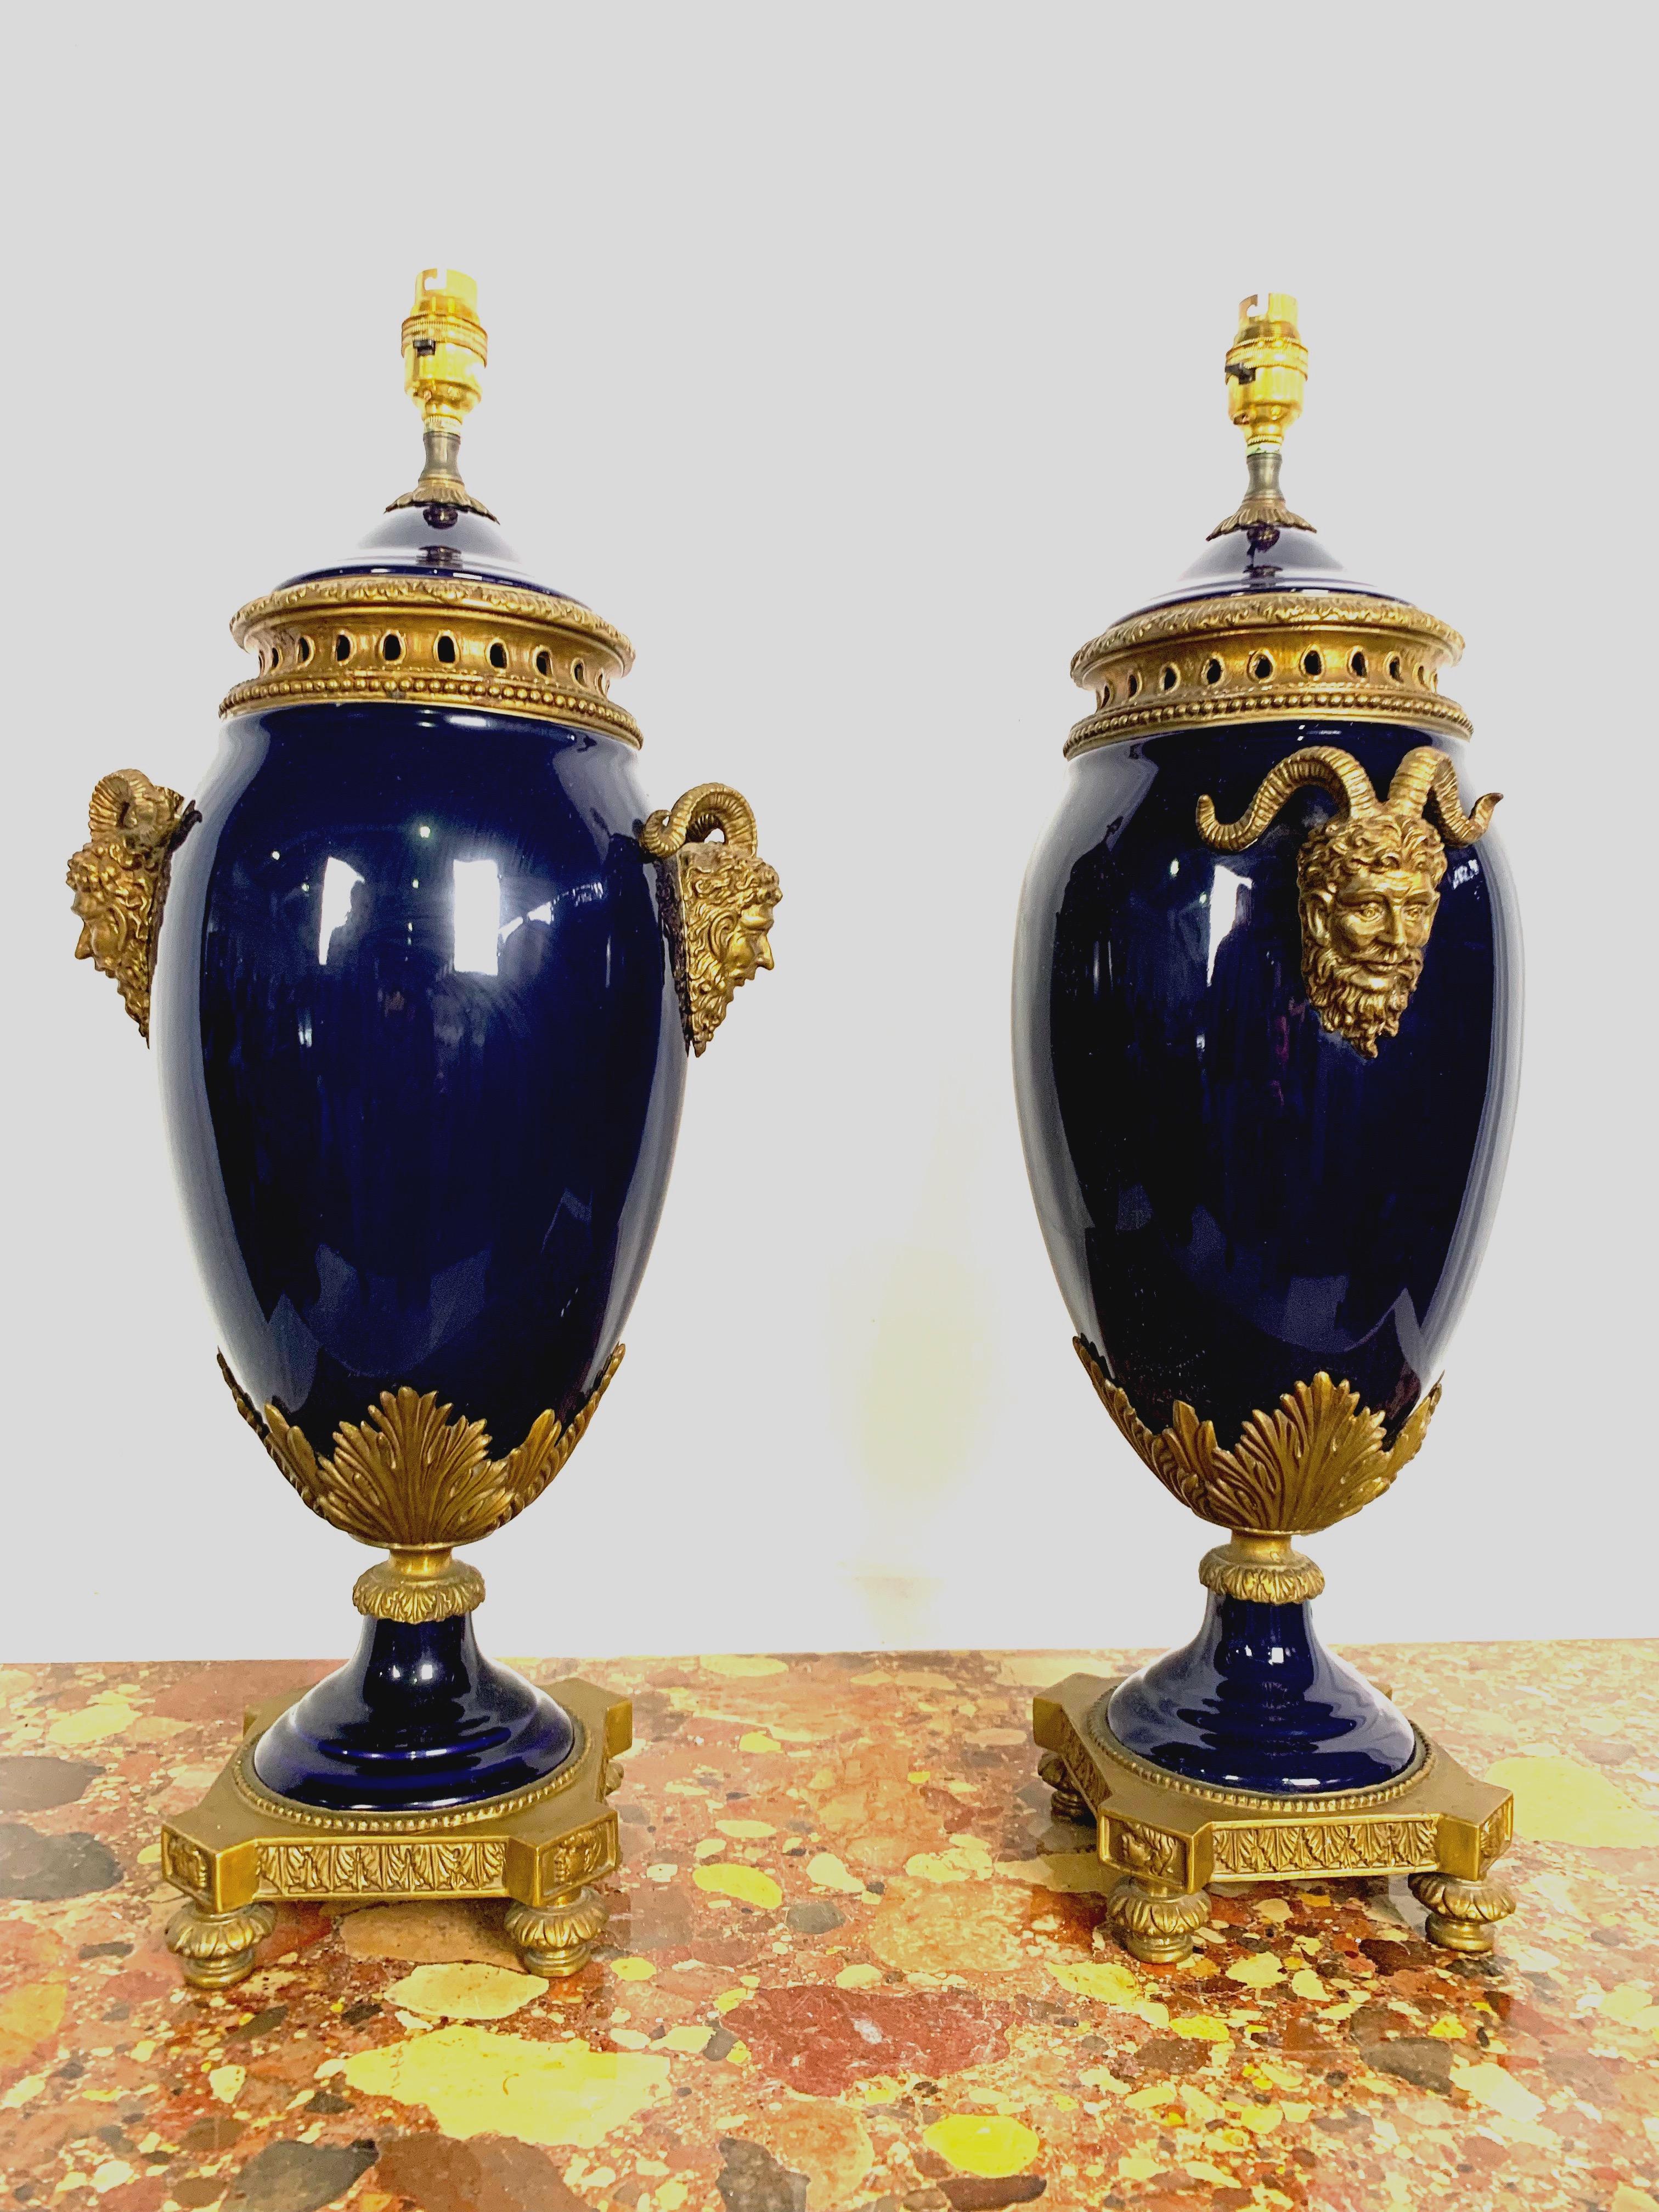 A very elegant pair of French 20th century Louis XVI. Cobalt blue Sèvres porcelain and ormolu lamps. Each lamp is raised on an ormolu base with beaded borders. The baluster shaped Sèvres porcelain body is decorated with lovely ormolu heads of Greek